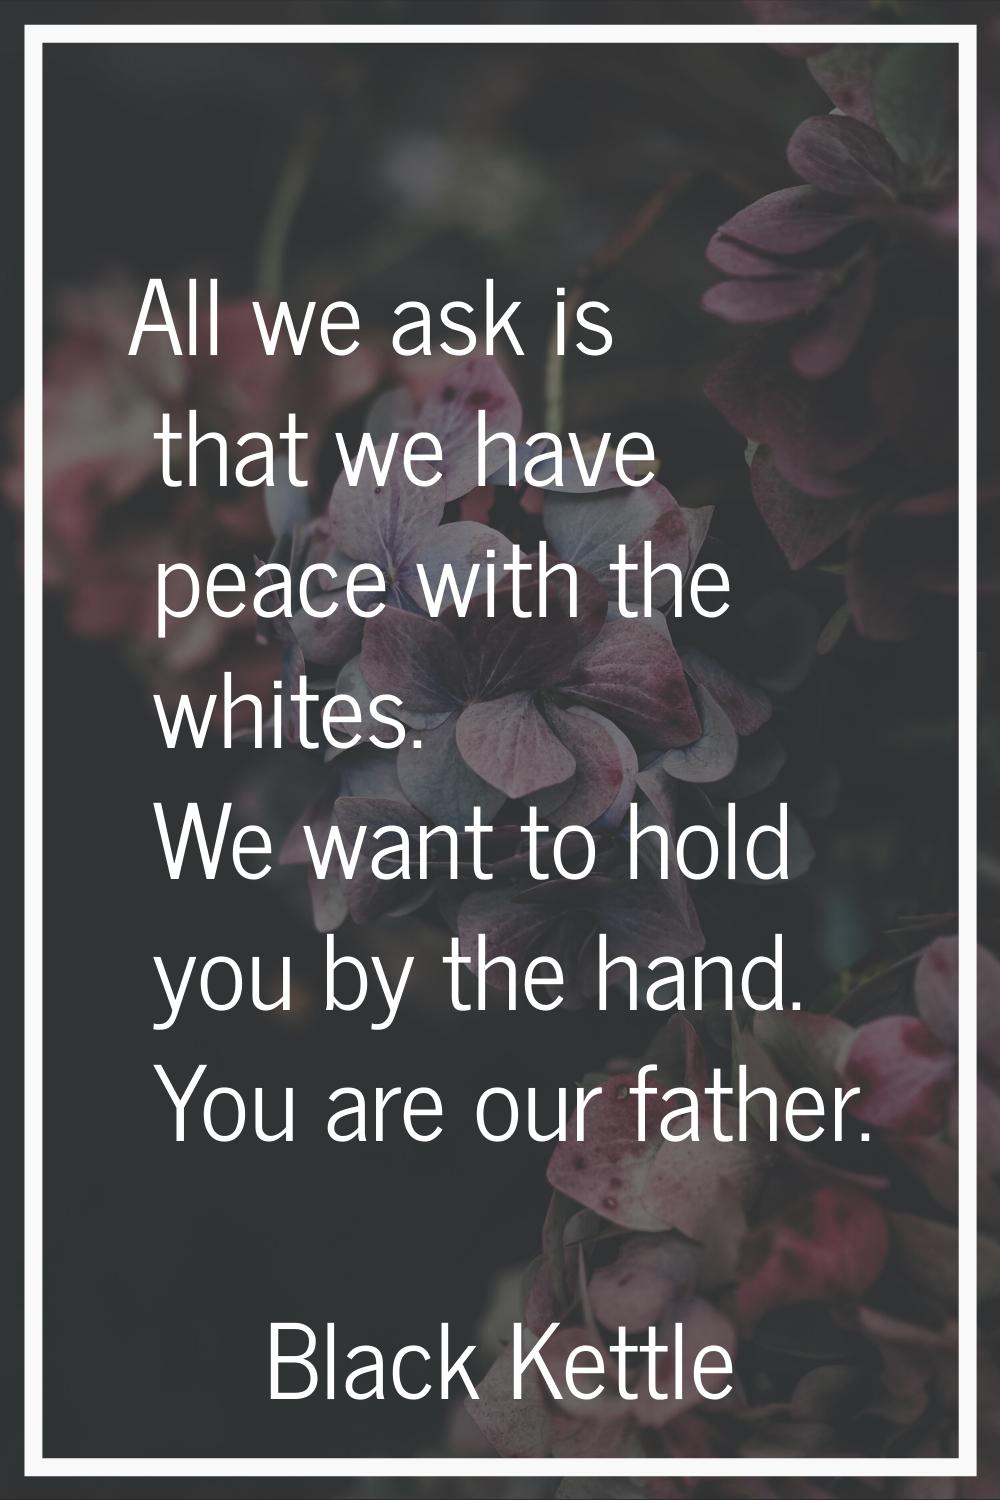 All we ask is that we have peace with the whites. We want to hold you by the hand. You are our fath